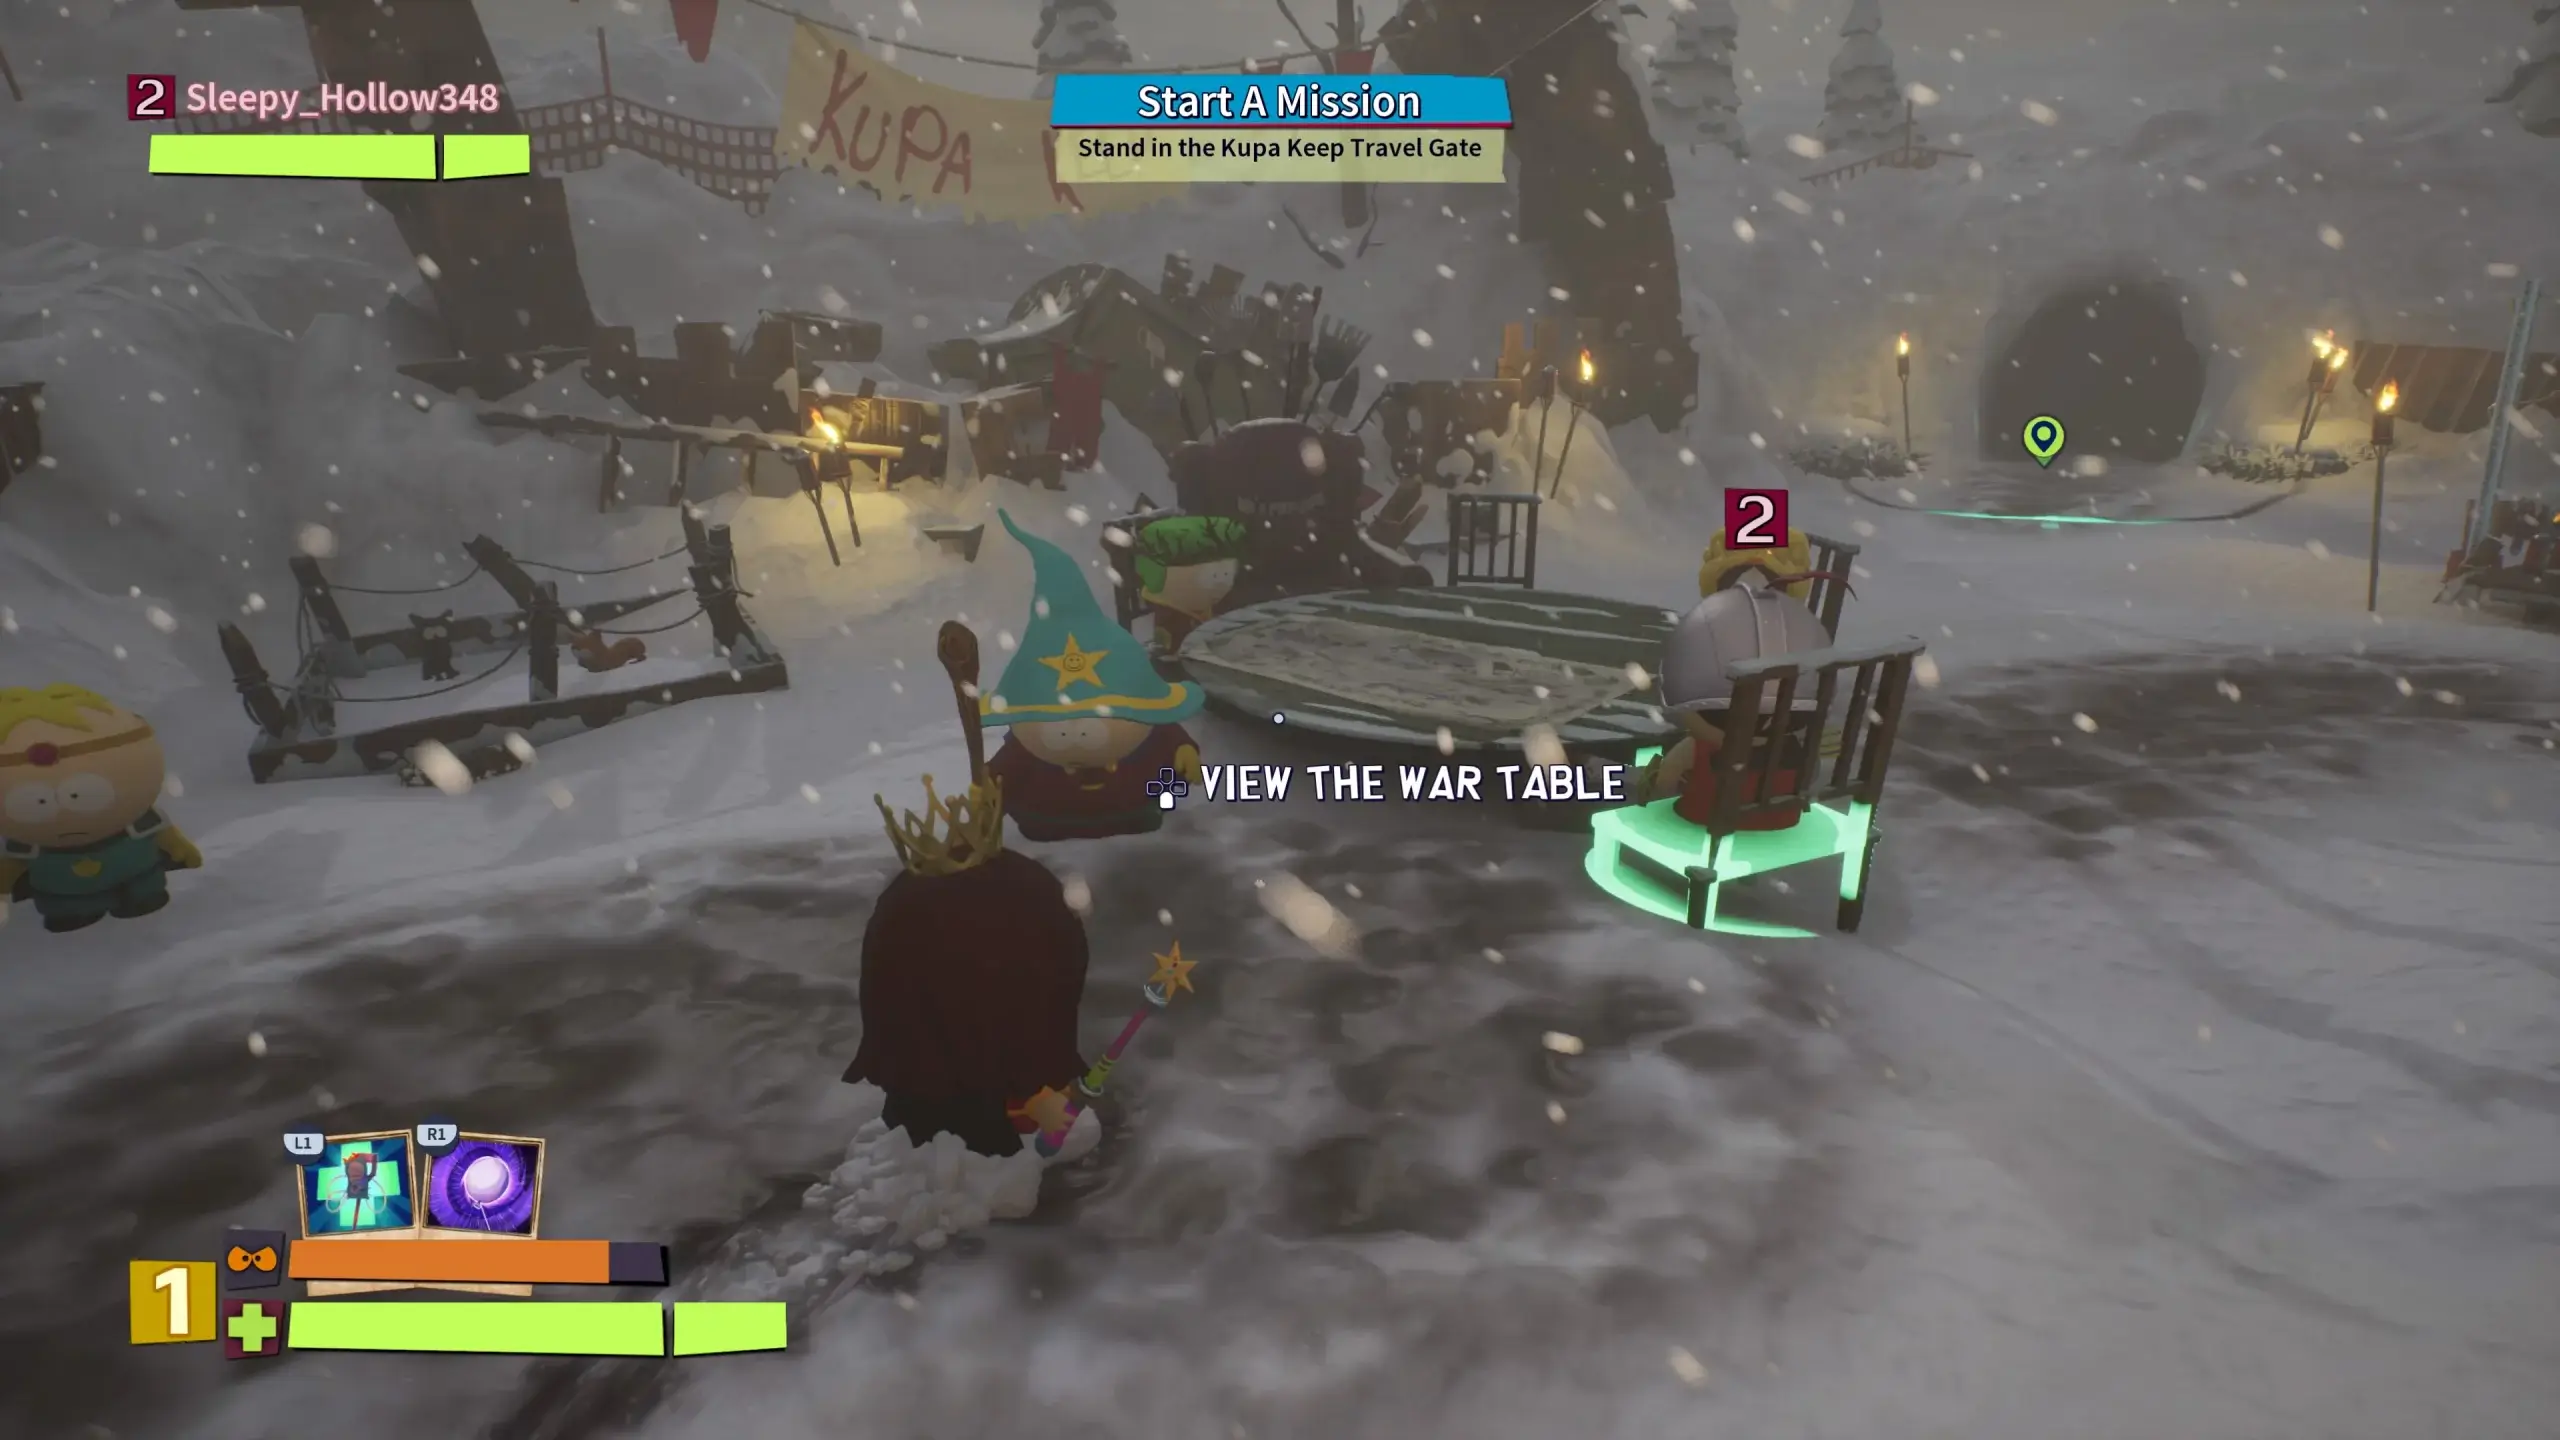 A picture of me and my brother near the War Table. Cartman and others are also nearby. The green icon in the distance is to tell the player to leave.